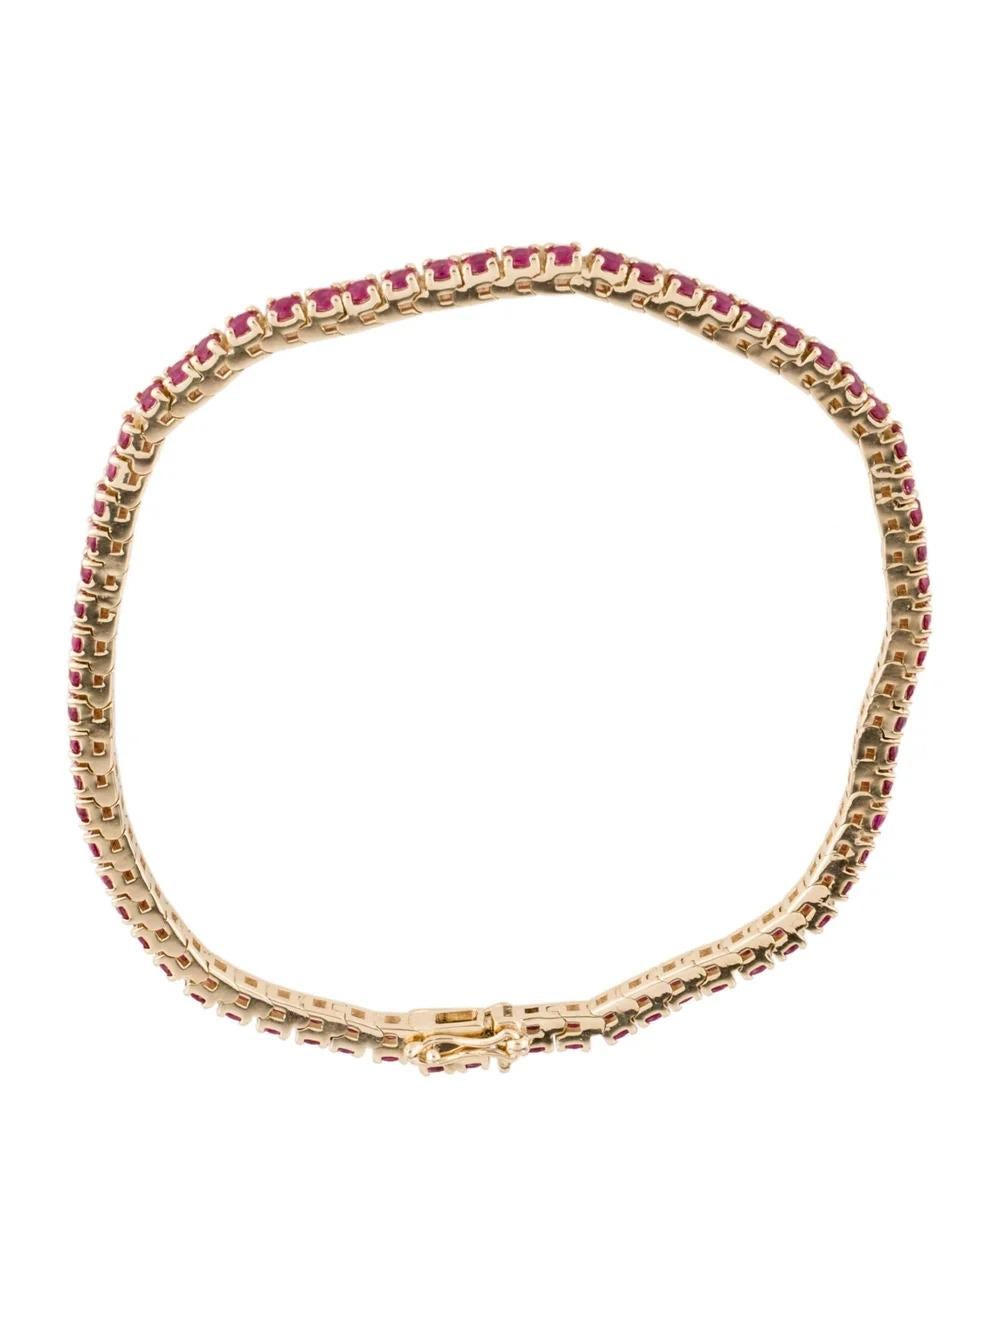 Vintage 14K Ruby Link Bracelet - Red Gemstone, Timeless Elegance, Luxury Piece In New Condition For Sale In Holtsville, NY